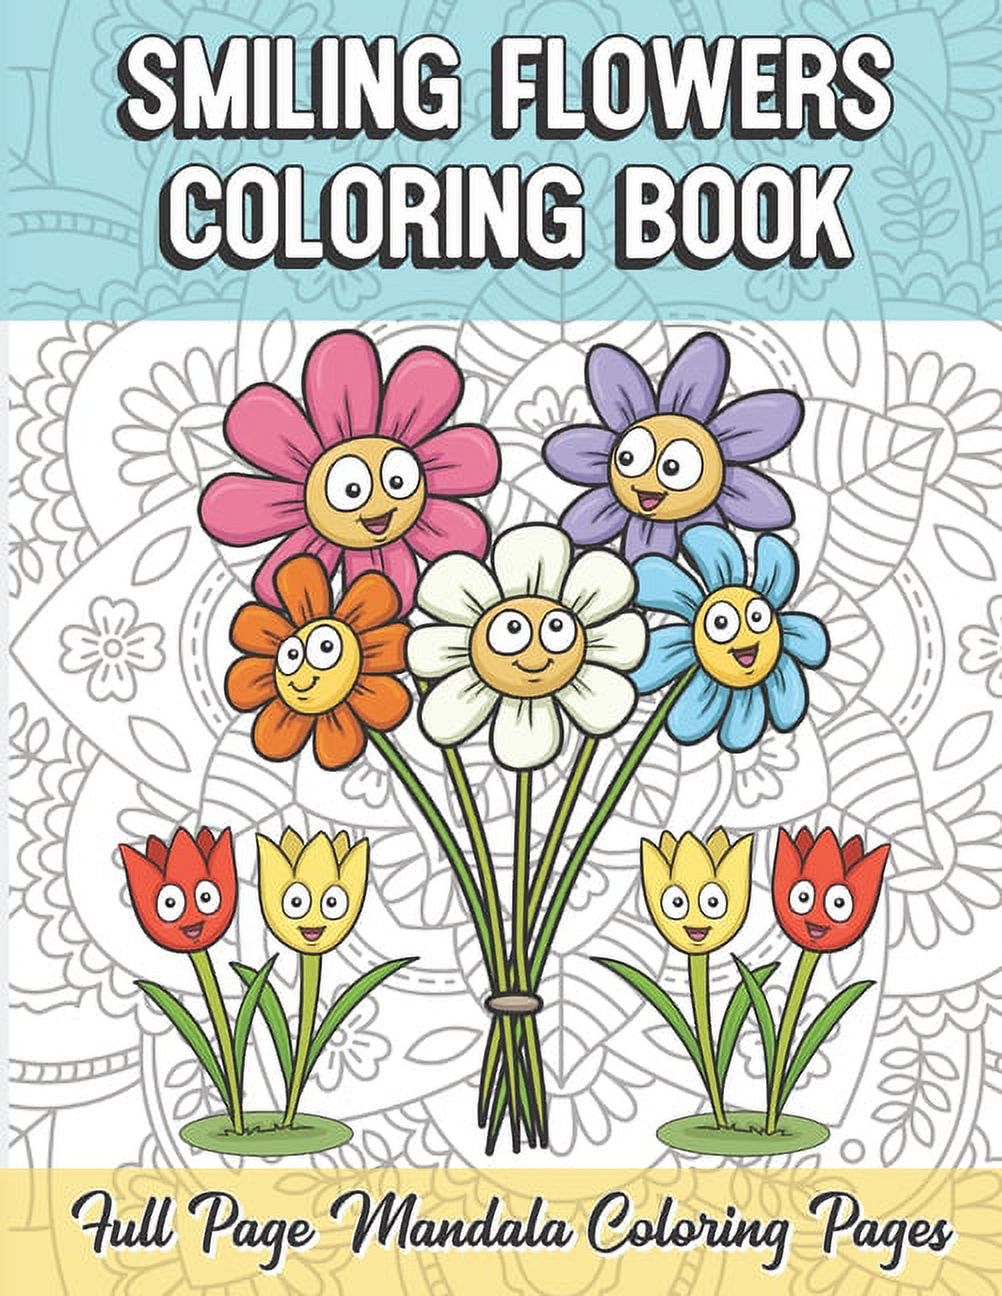 Smiling Flowers Coloring Book Full Page Mandala Coloring Pages: Color Book  with Mindfulness and Stress Relieving Designs with Mandala Patterns for  Relaxation. Adult Coloring Guide for Meditation and H 